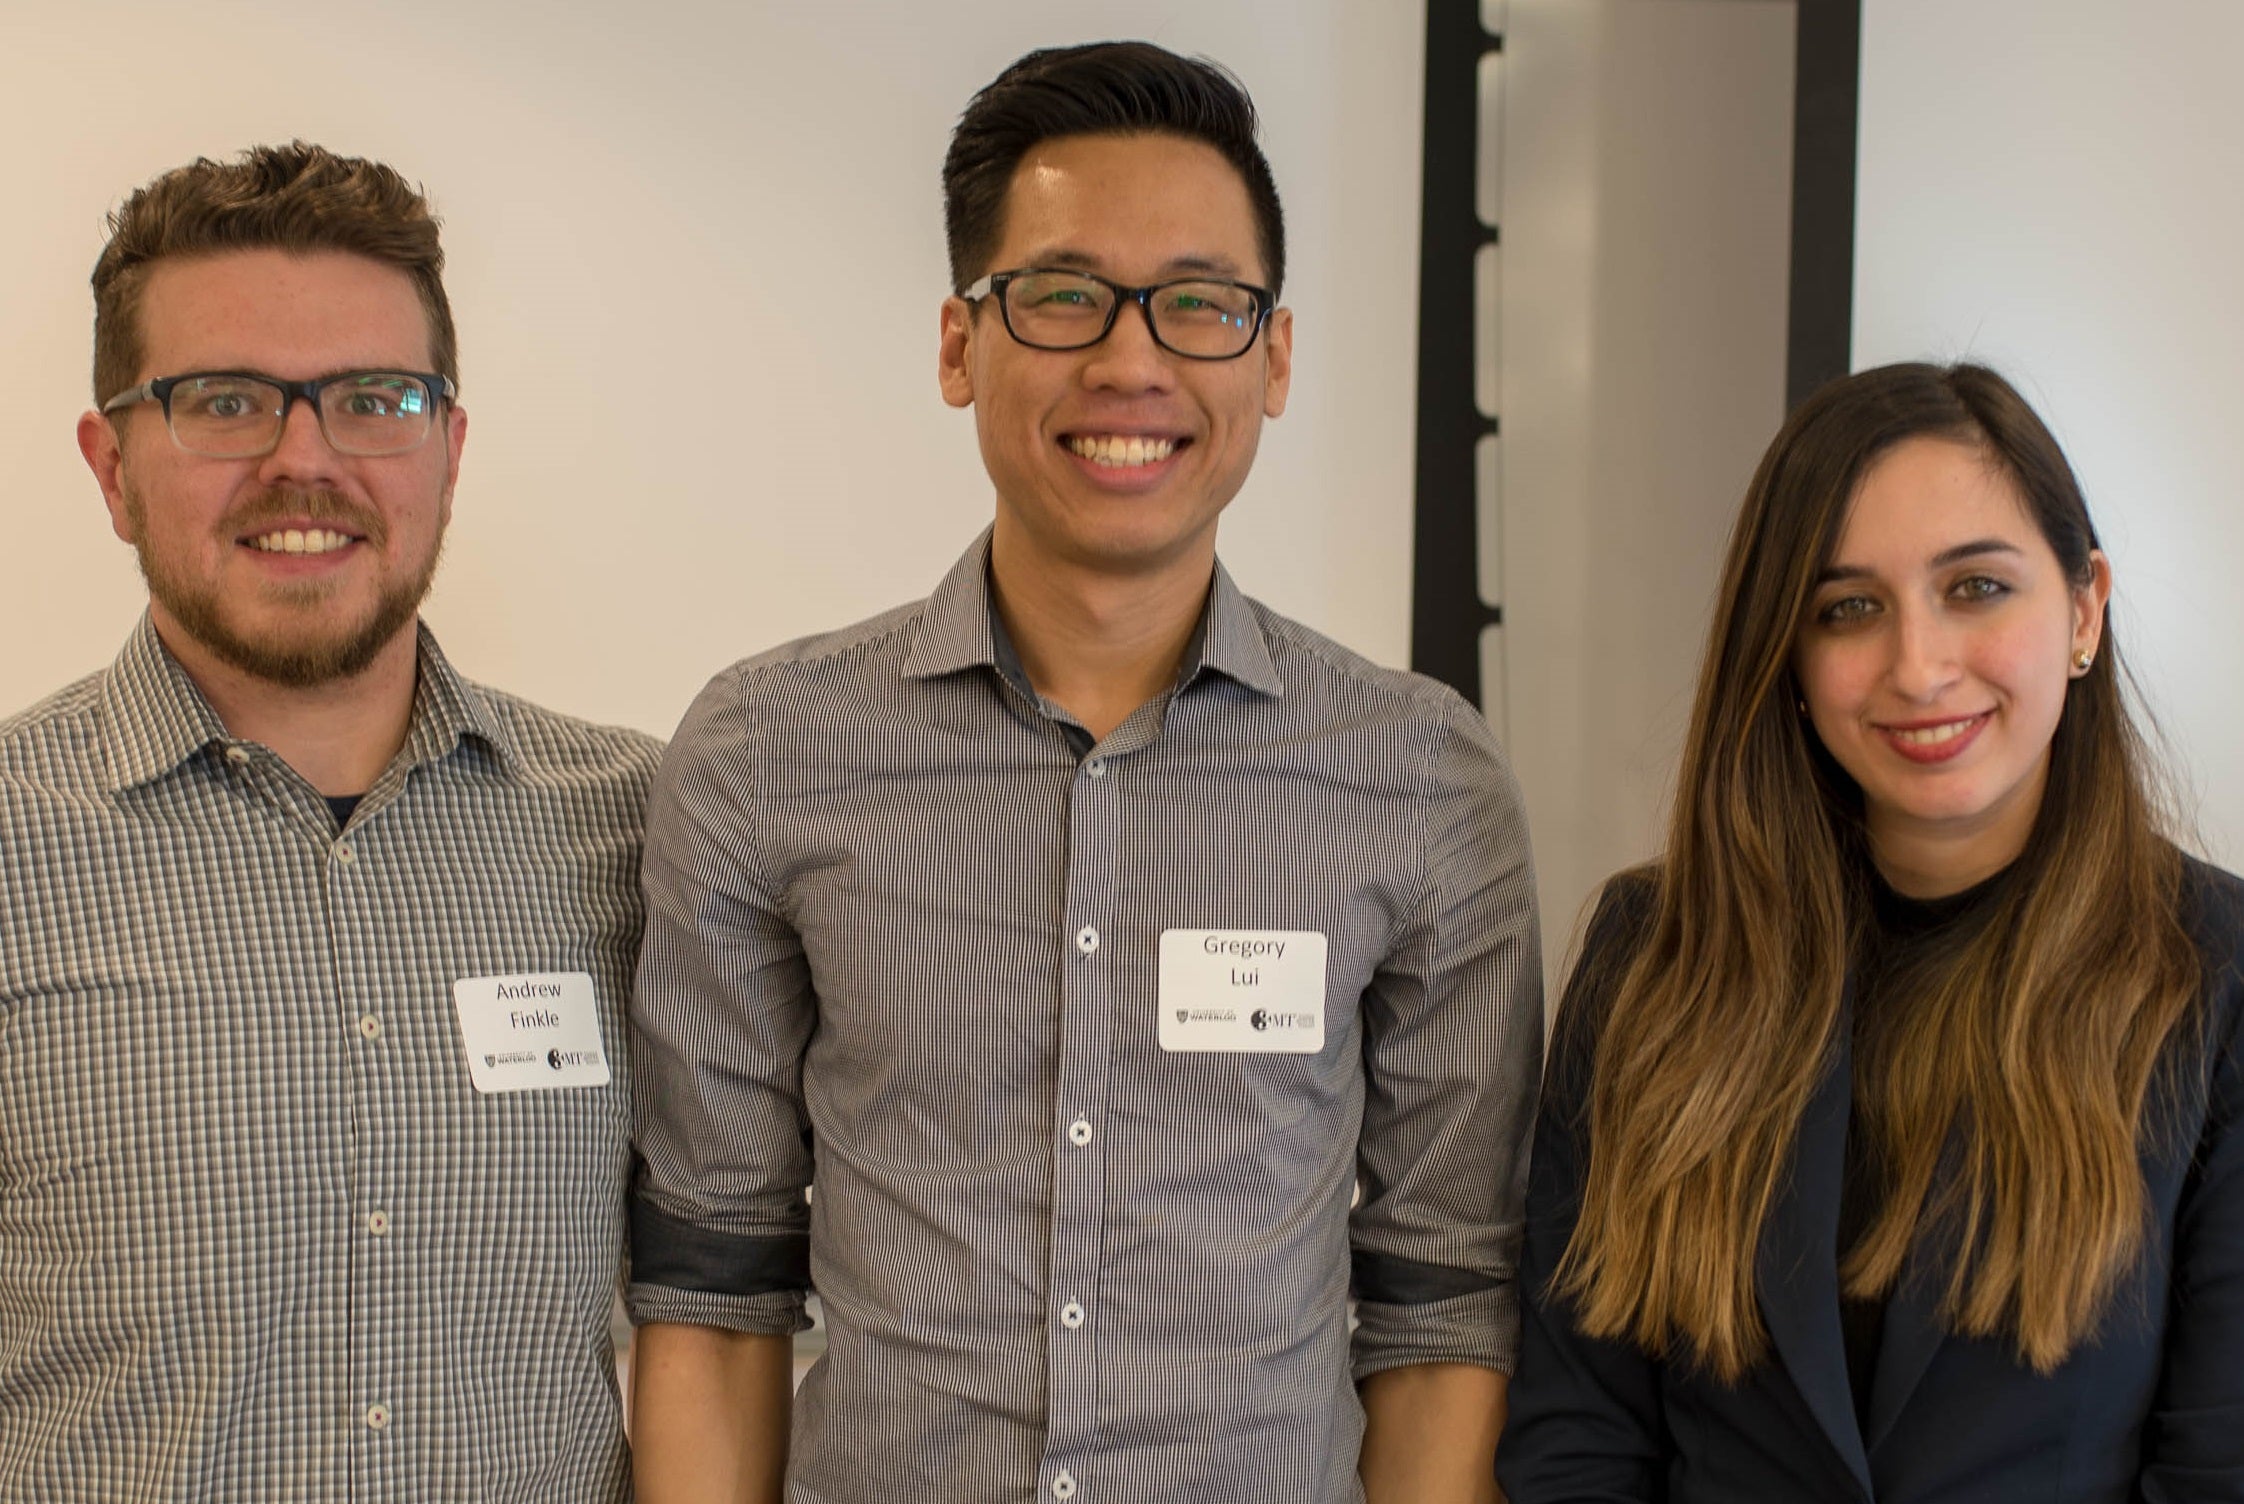 The three finalists of the Department of Chemical Engineering’s 2018 Three Minute Thesis Competition (L-R): Andrew Finkle (third place), Gregory Lui (first place) and Kiana Amini (second place).